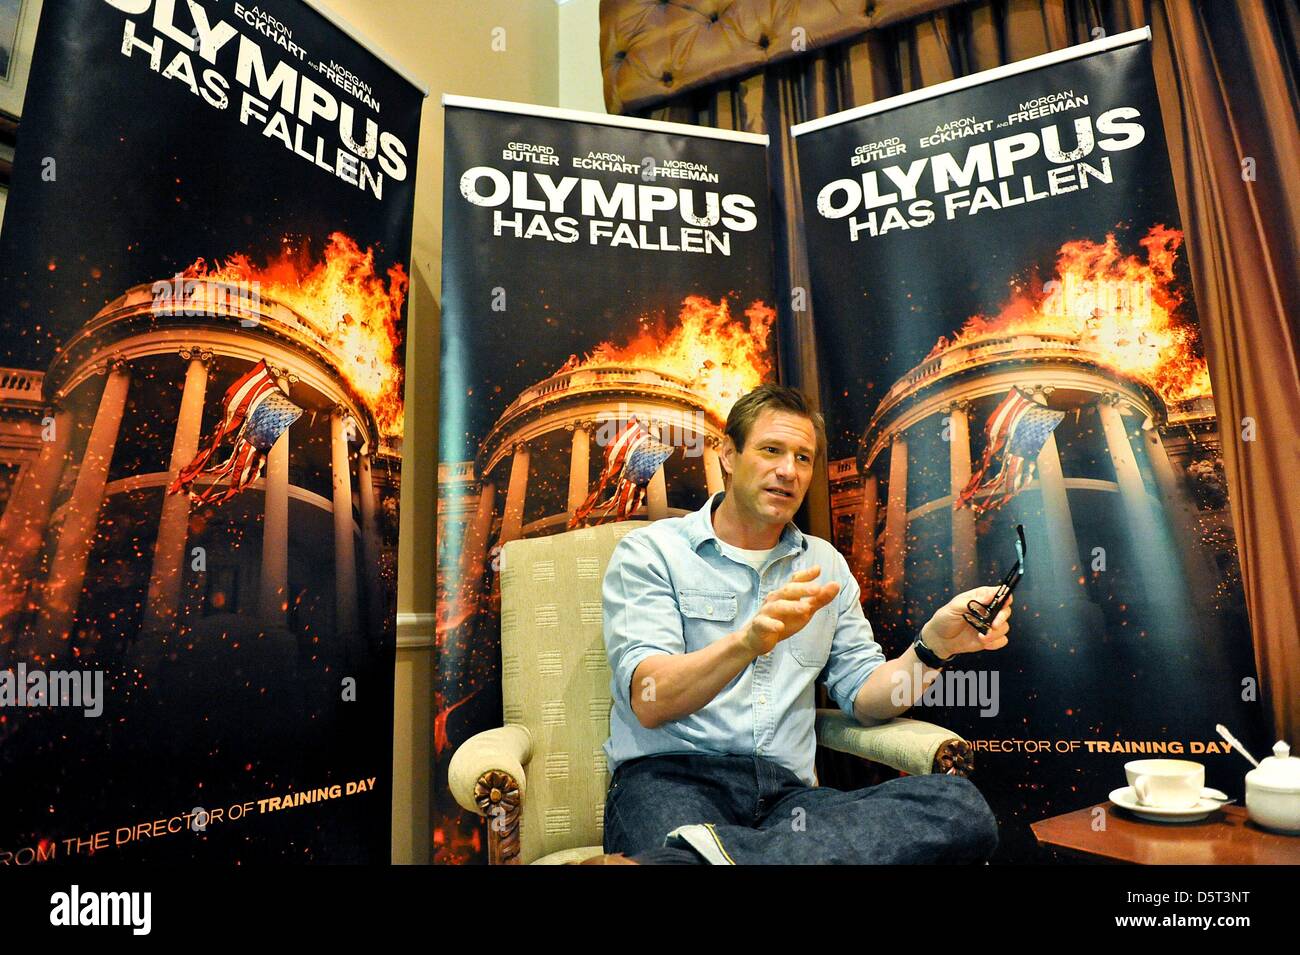 Johannesburg, South Africa. 8th April 2013.  American actor Aaron Eckhart on April 8, 2013, in Johannesburg, South Africa. Eckhart and co-star, Gerard Butler are in South Africa for the premier of their film, 'Olympus has Fallen'. (Photo by Gallo Images / Foto24 / Bongiwe Gumede/Alamy Live News) Stock Photo